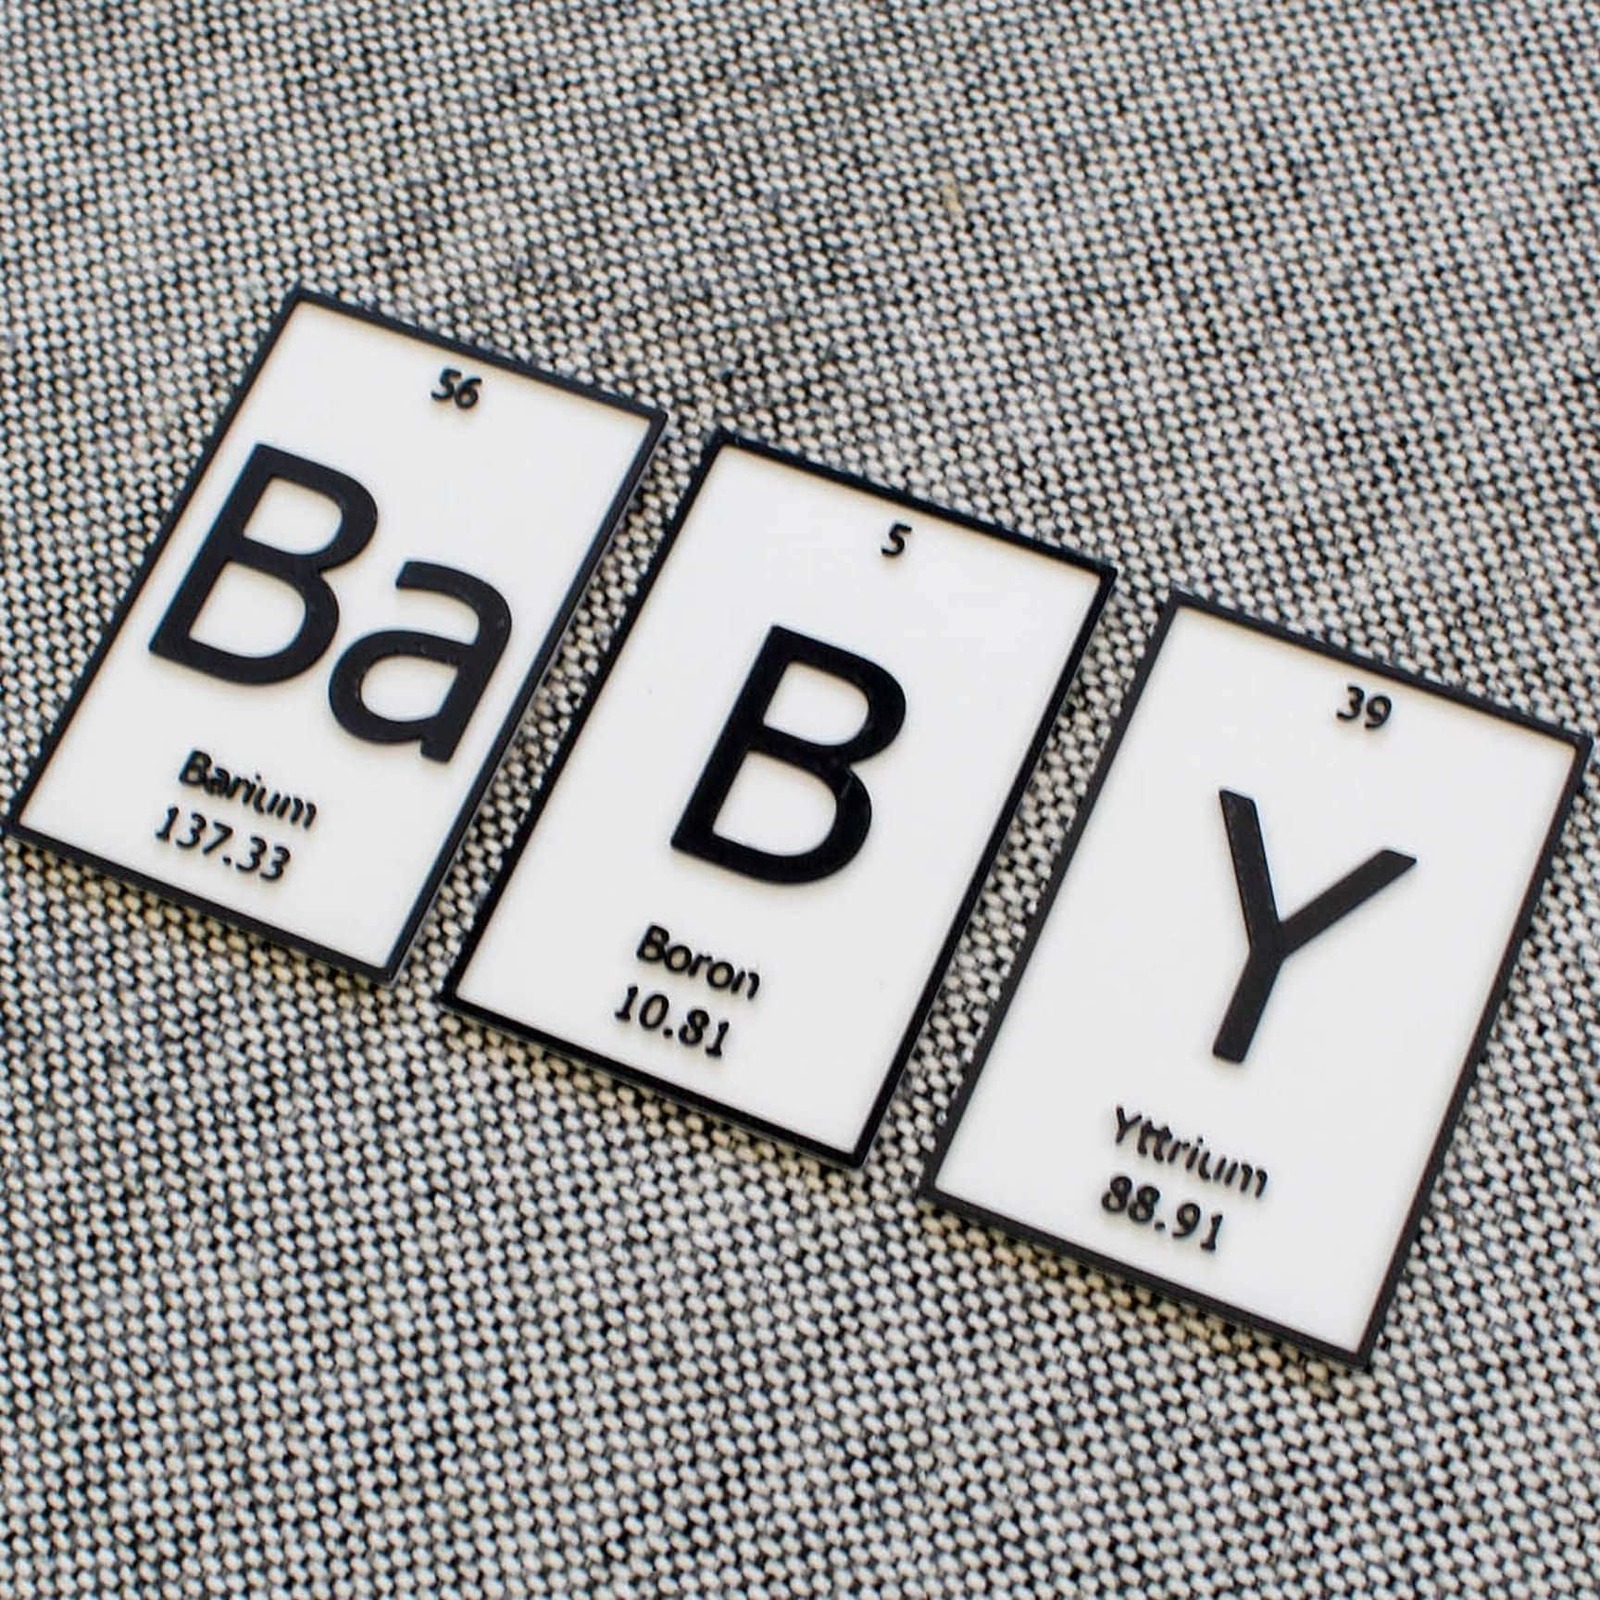 Primary image for BaBY | Periodic Table of Elements Wall, Desk or Shelf Sign